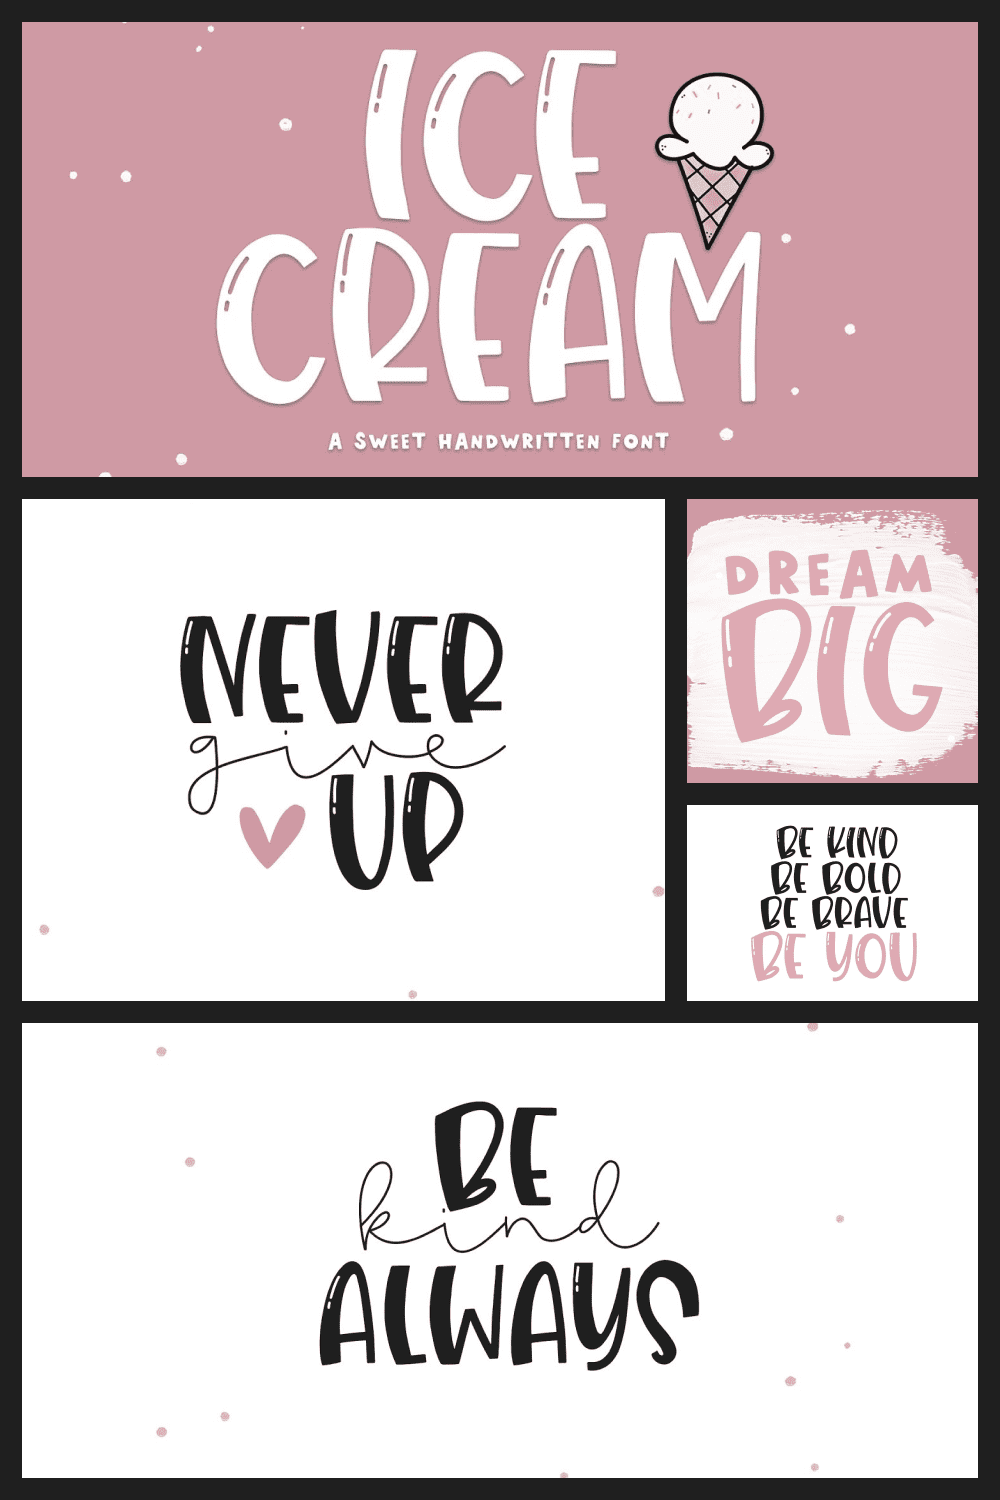 Ice Cream is a handwritten font with big, quirky letters.